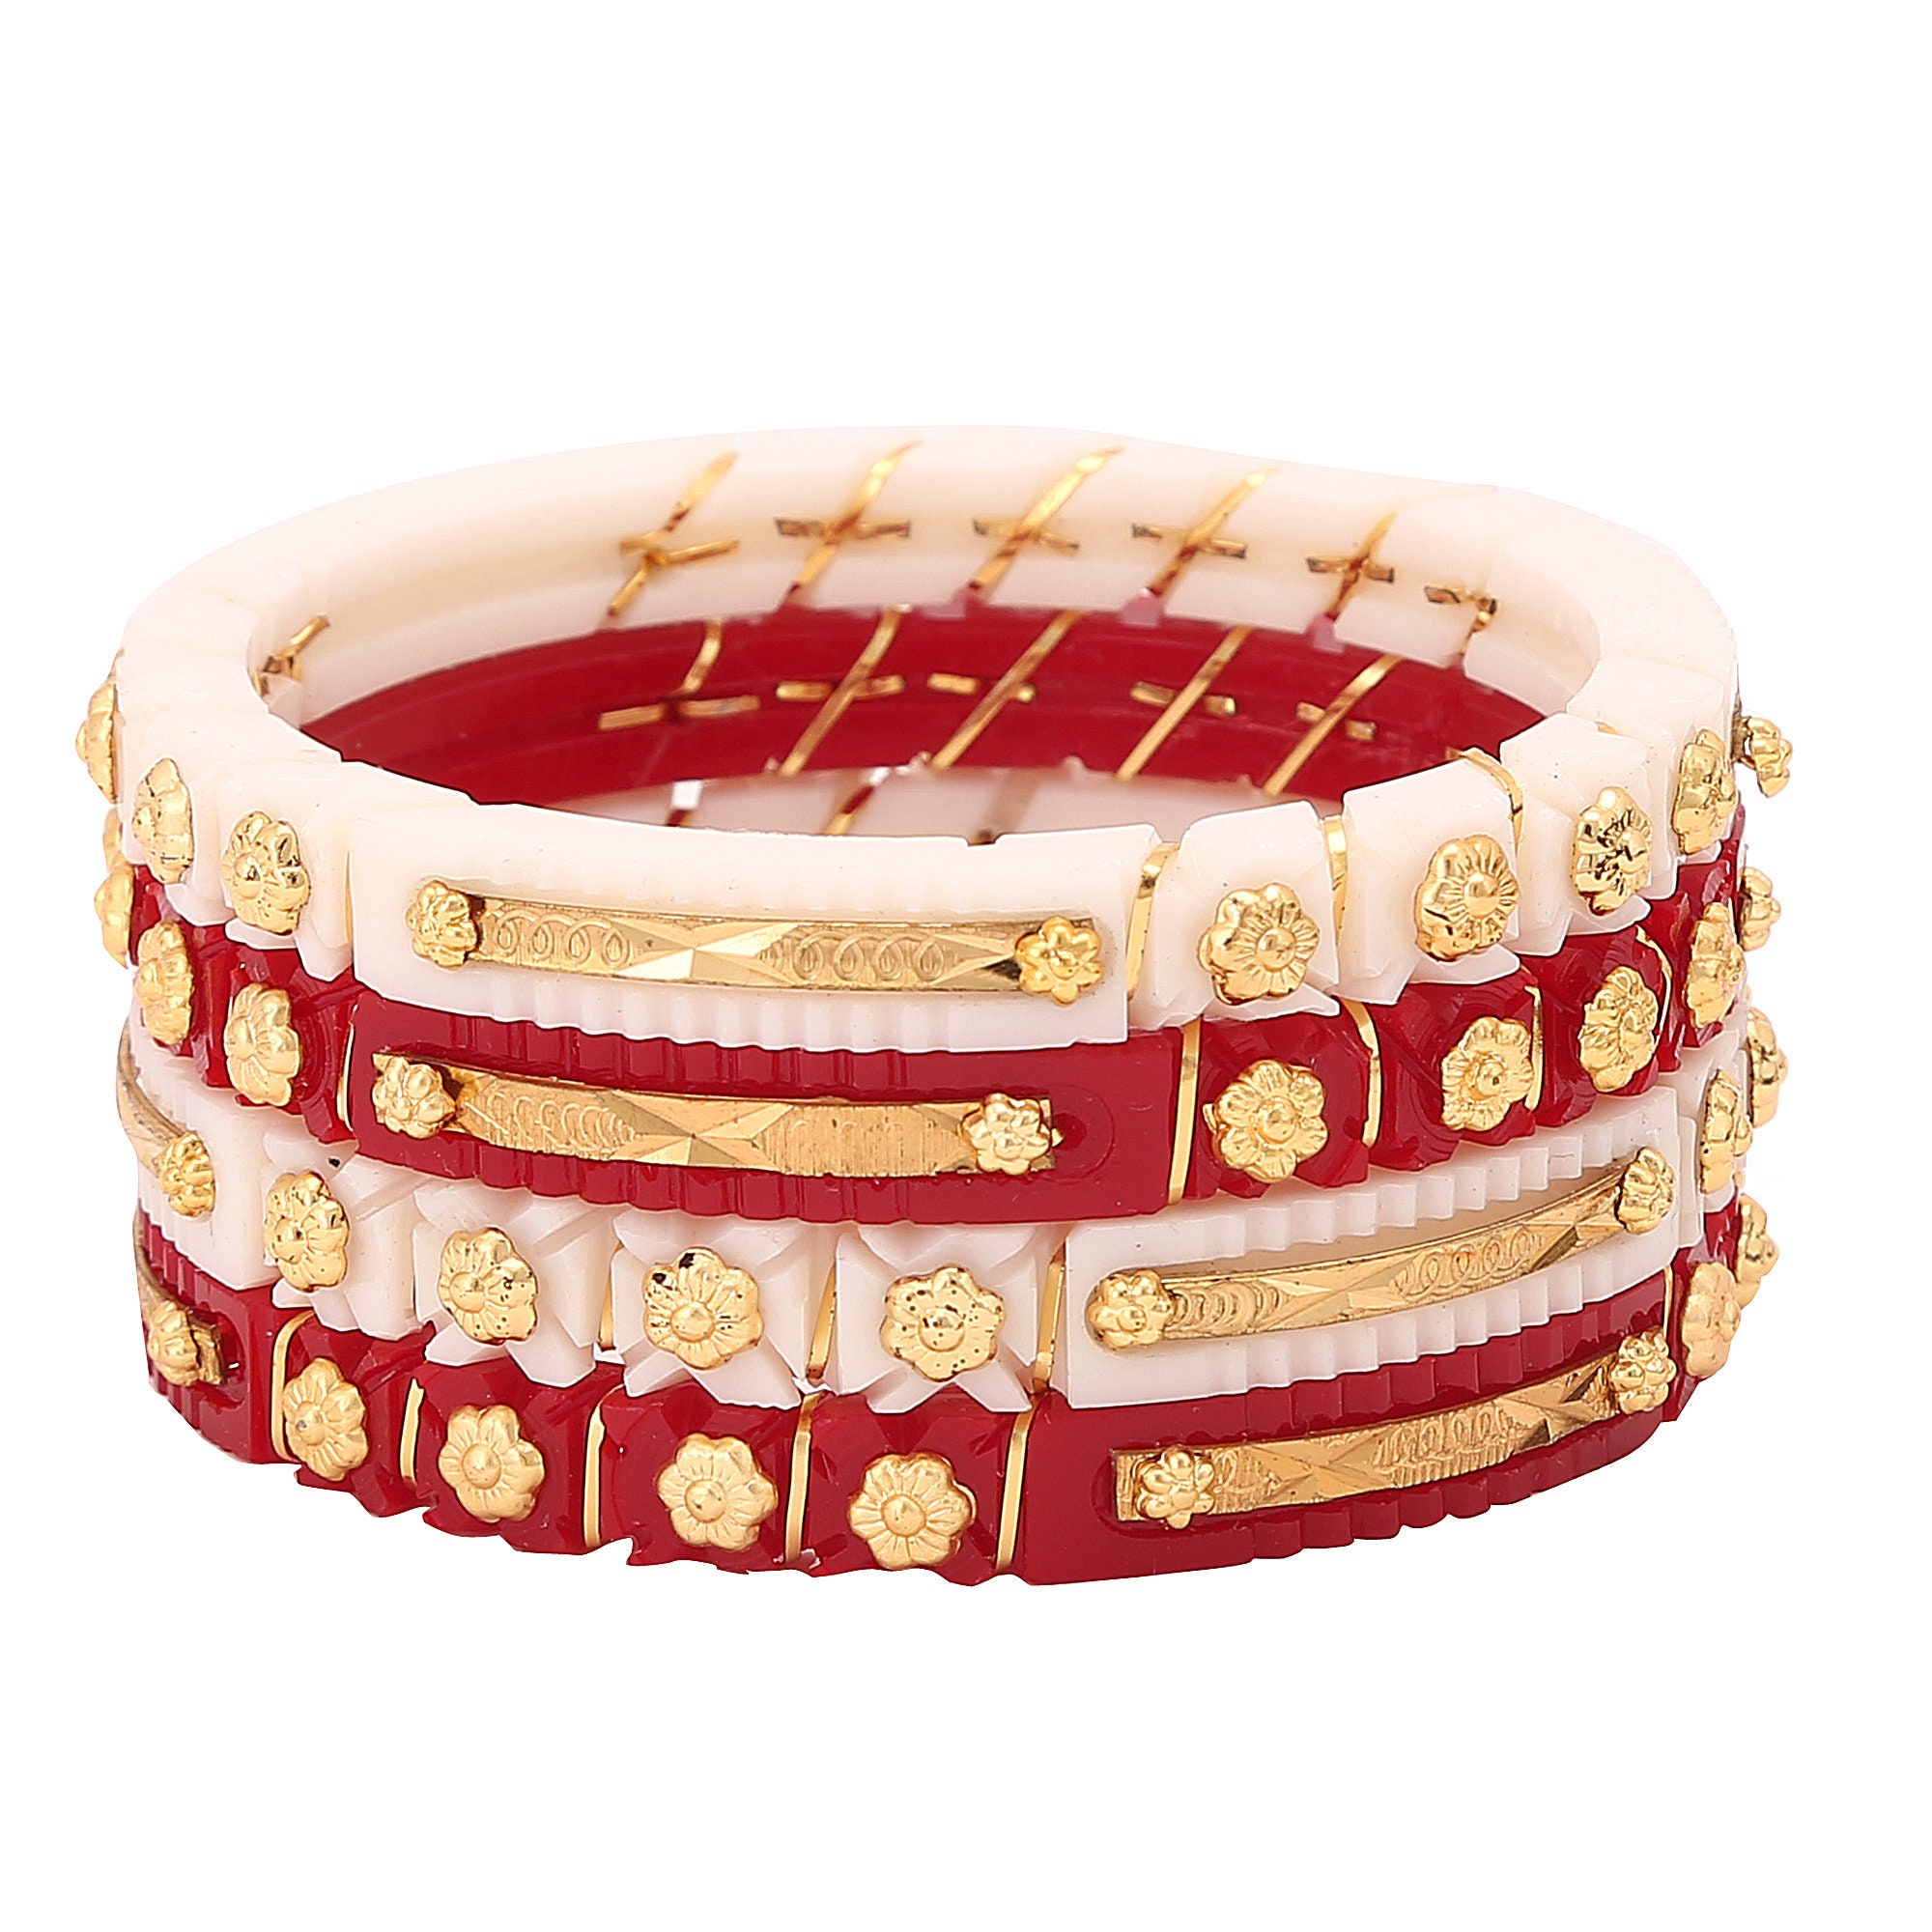 Buy Handmade Shakha Pola Gold Plated Acrylic Bangle for Women, Red and  White Pack of 4 Online in India - Etsy